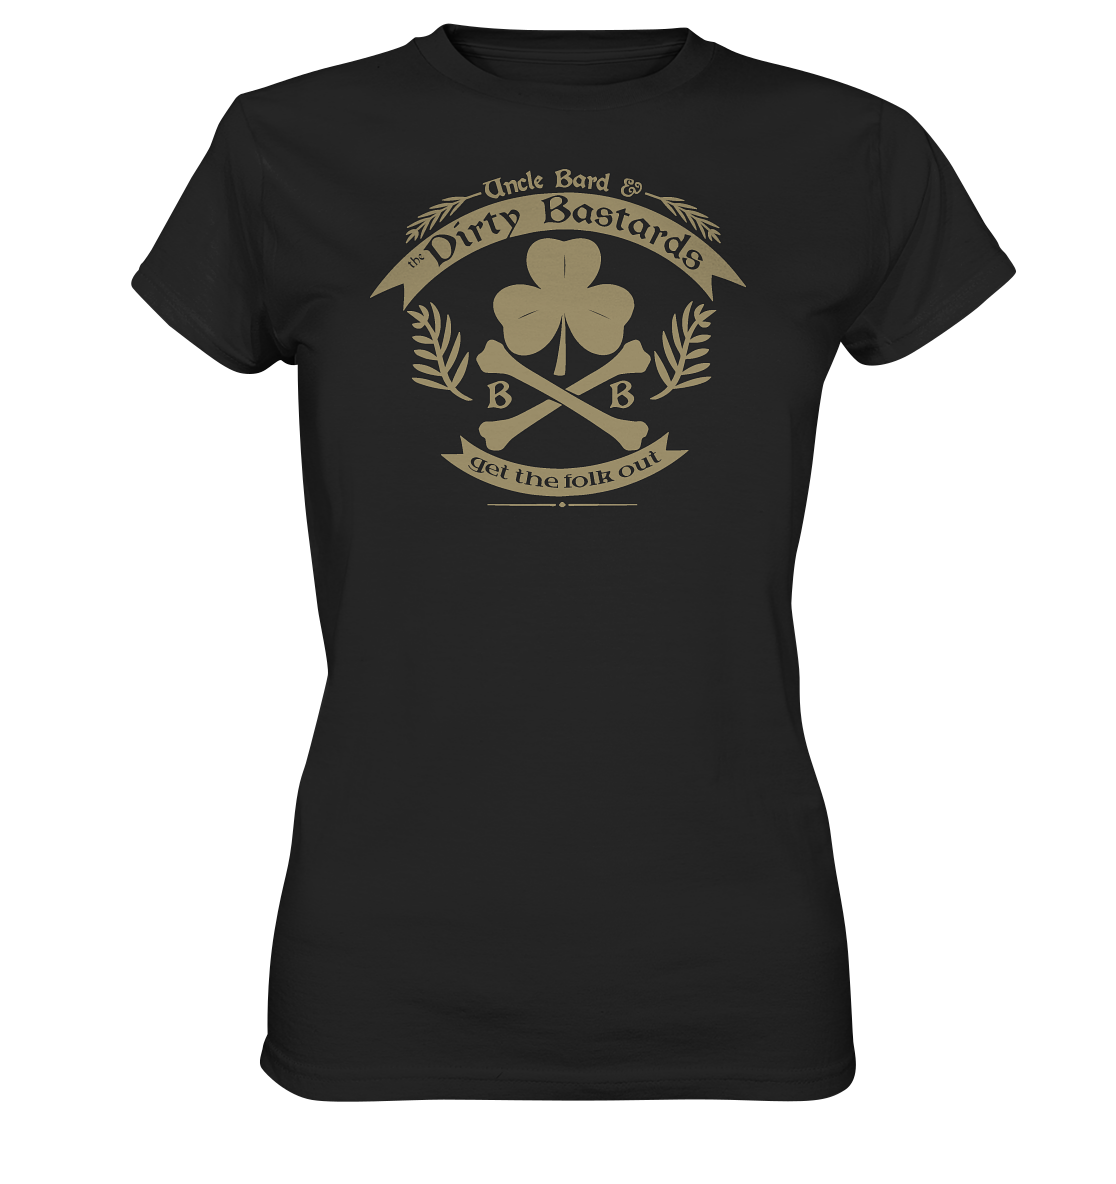 Uncle Bard & the Dirty Bastards "Get The Folk Out" - Ladies Premium Shirt